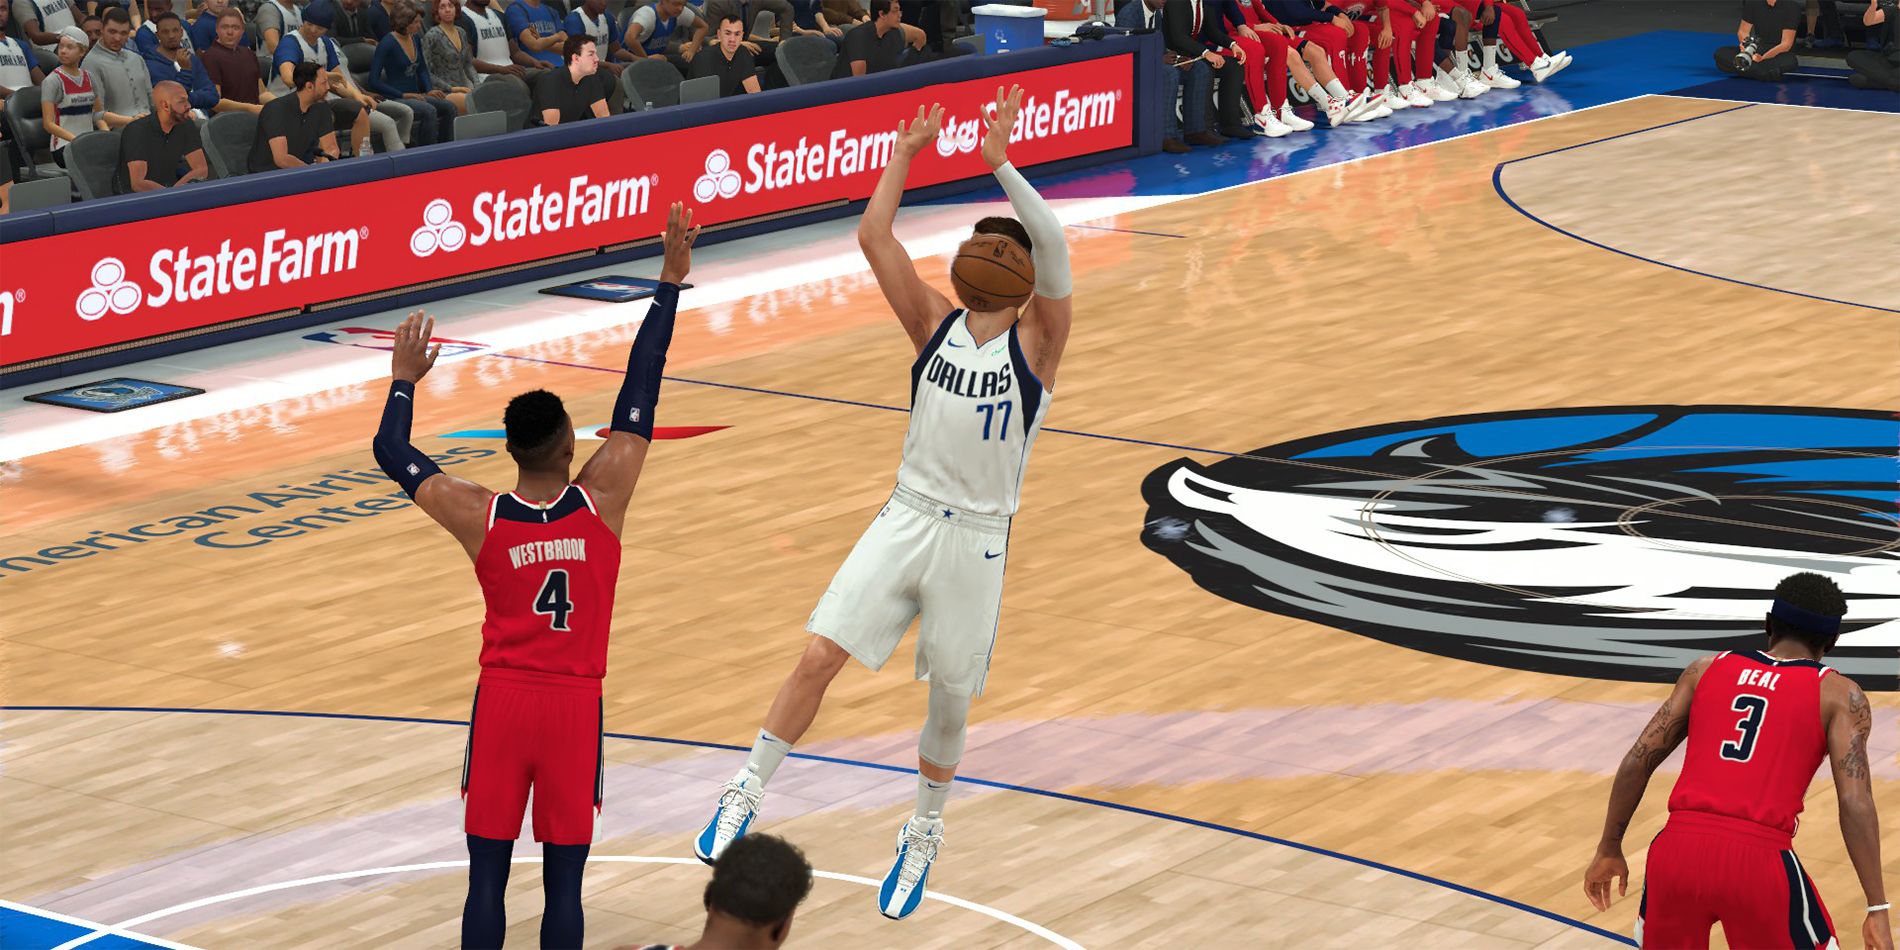 A glitch where the ball is in a player's face in NBA 2K